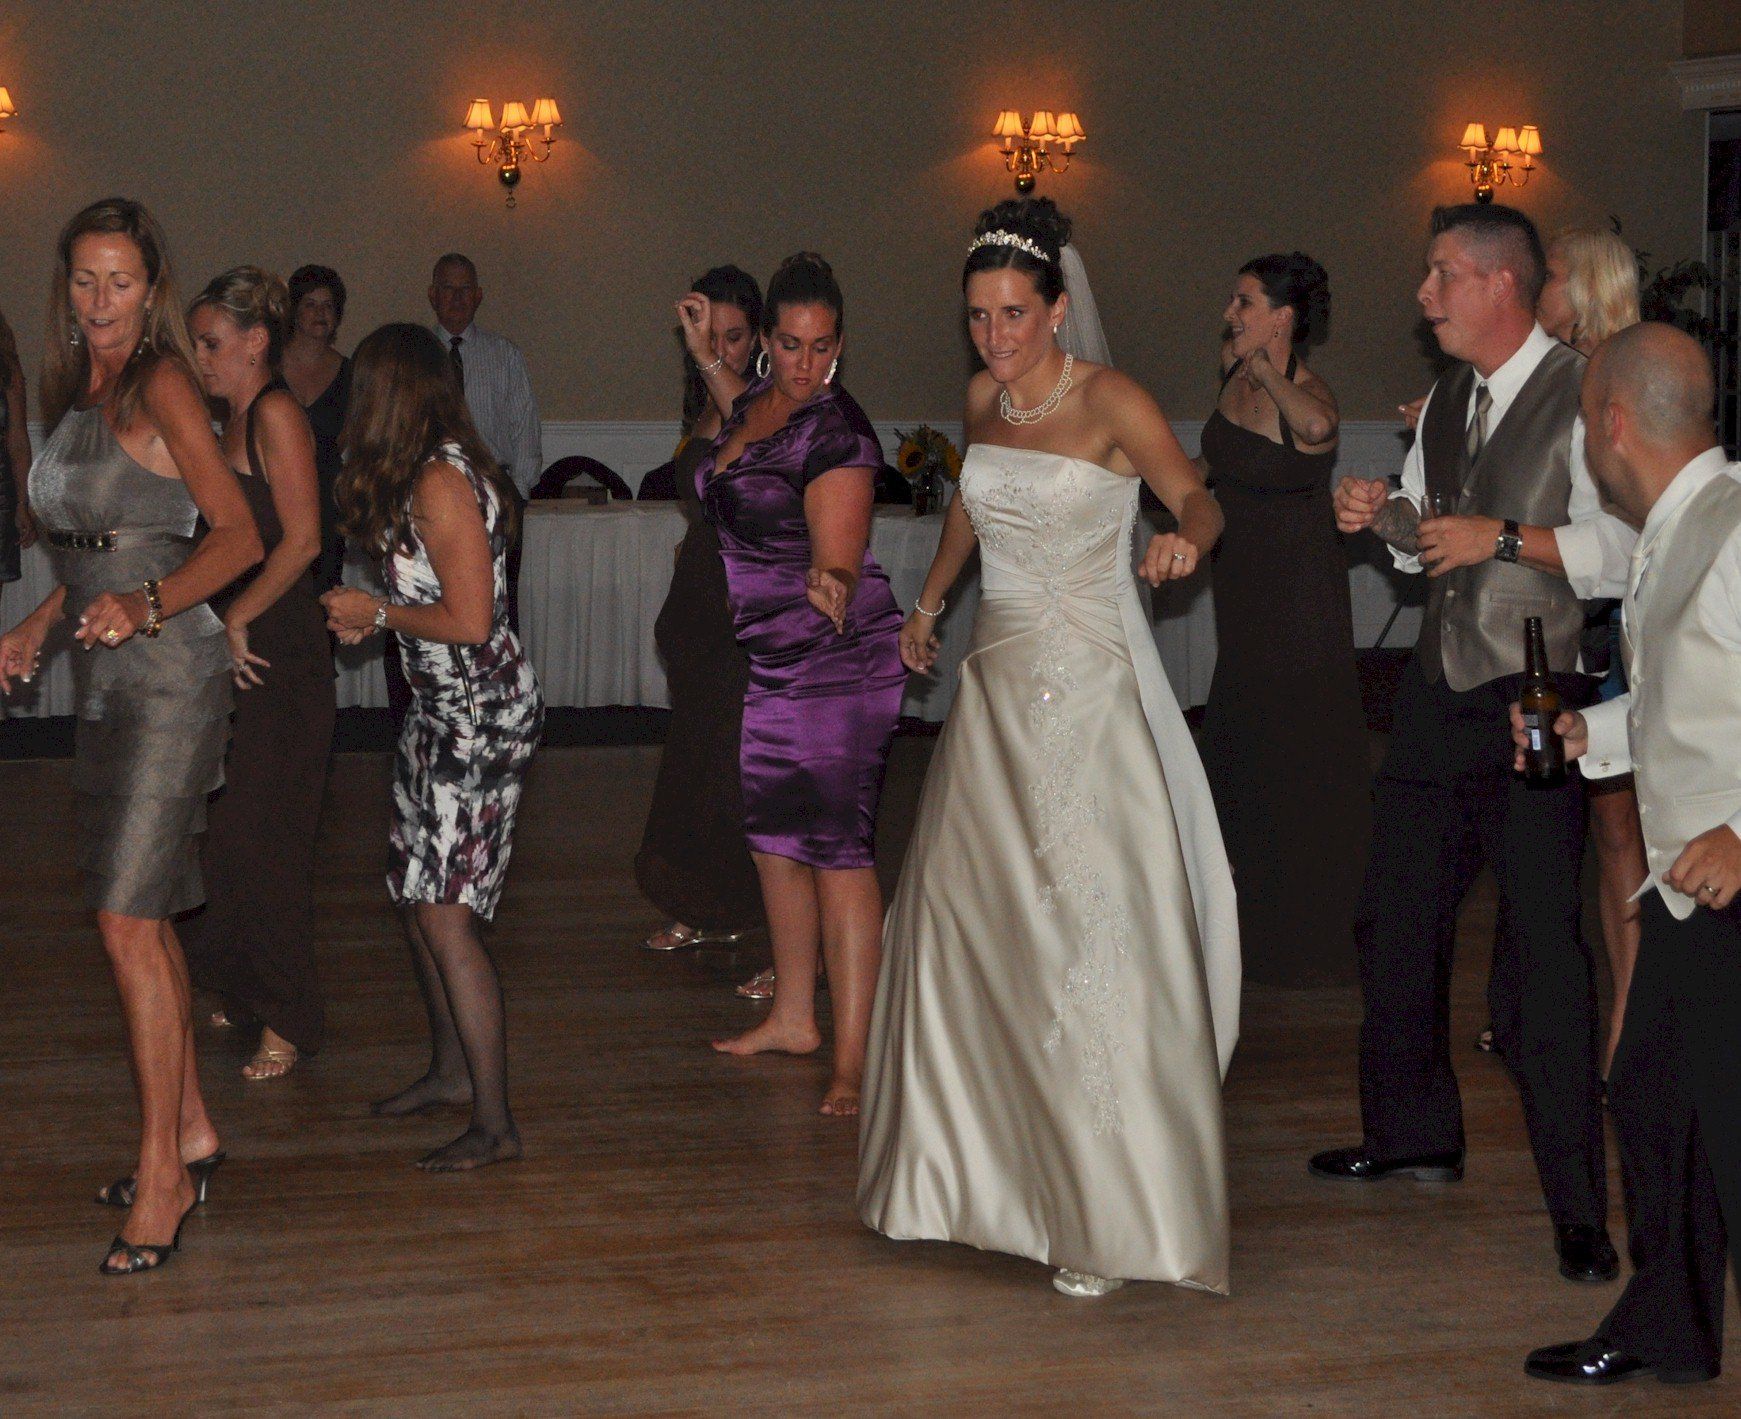 DJ Dancing Hillview Country Club, North Reading, Massachusetts